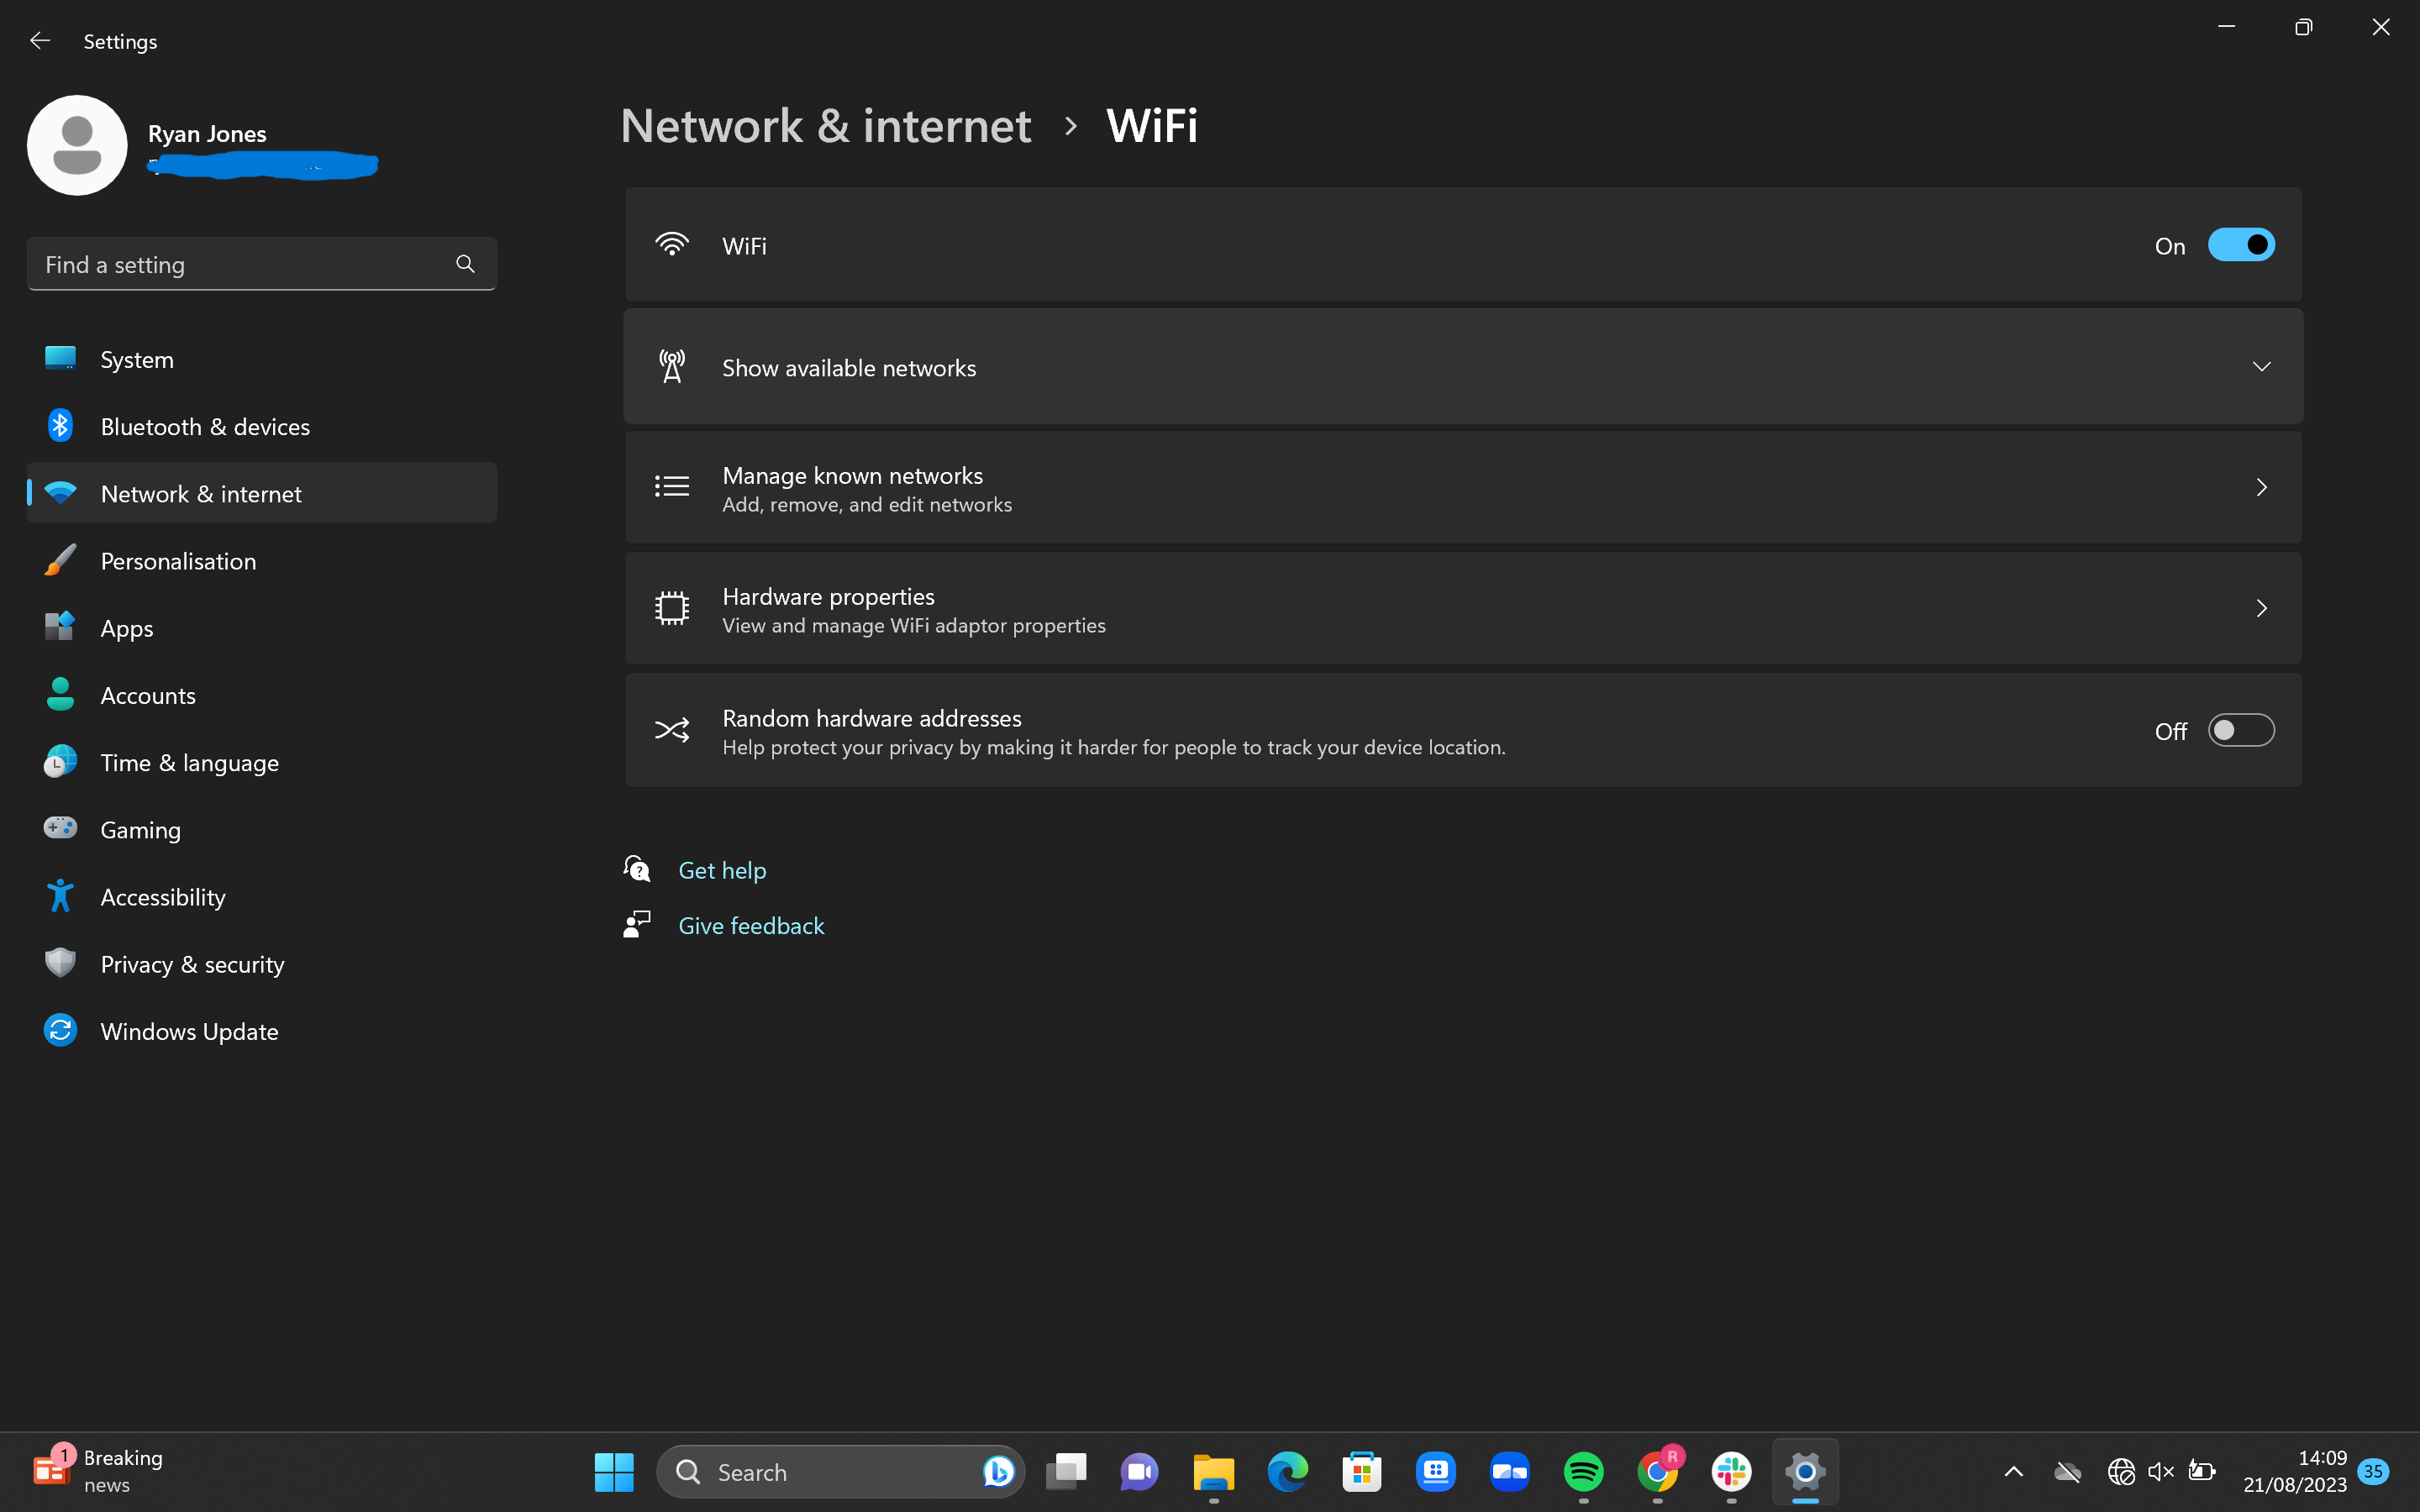 How to connect to WI-Fi on Windows 11